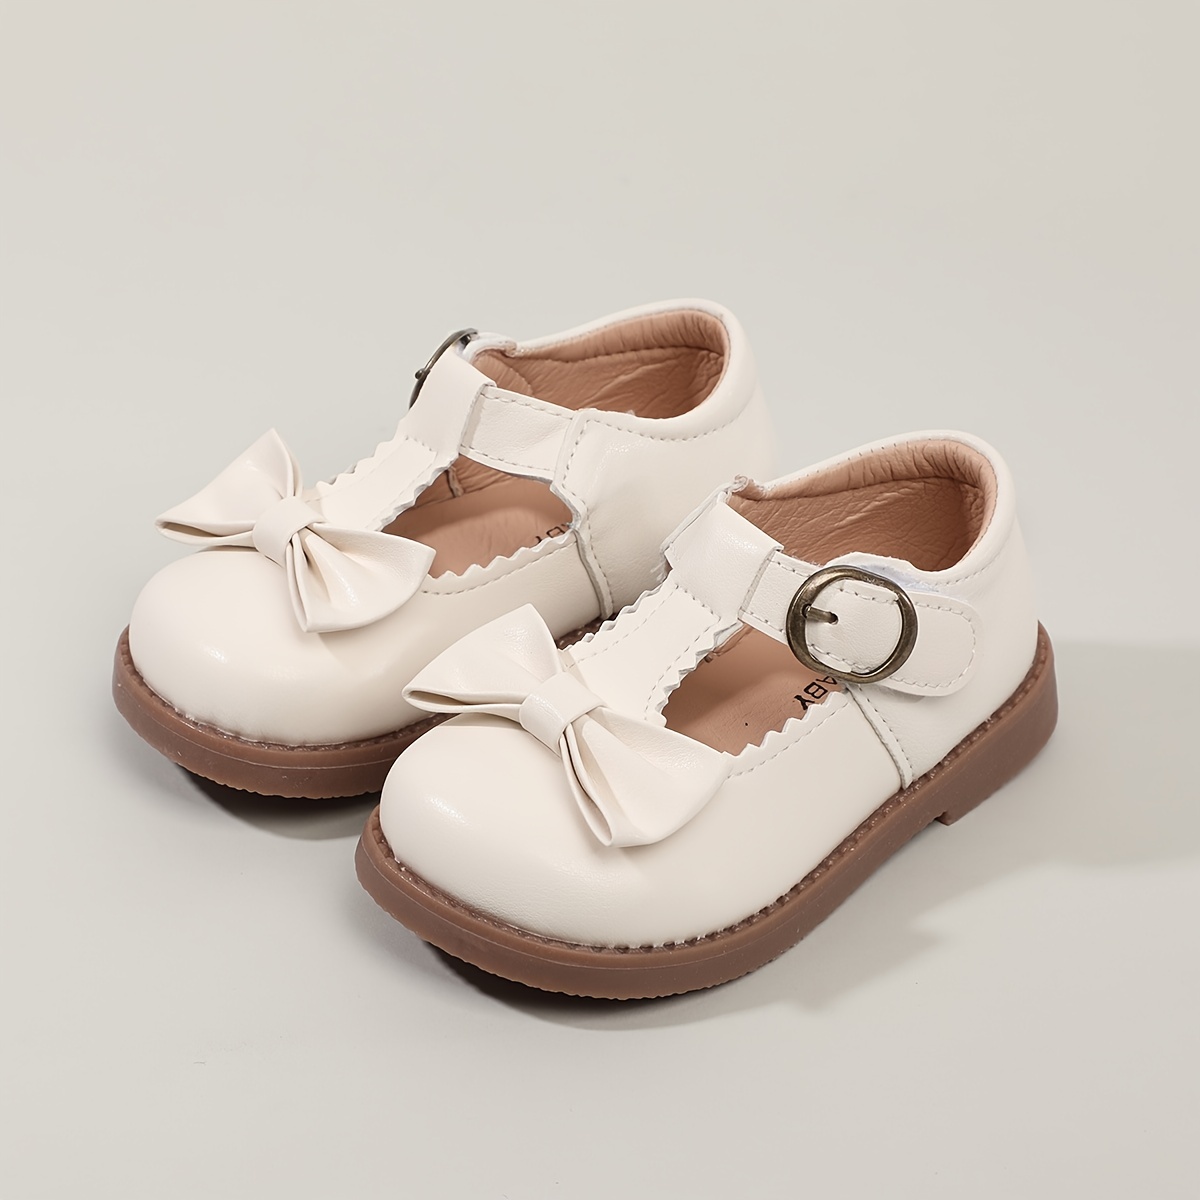 Toddler Shoes For Spring: Girls Mary Jane Flats Non slip Casual Bow